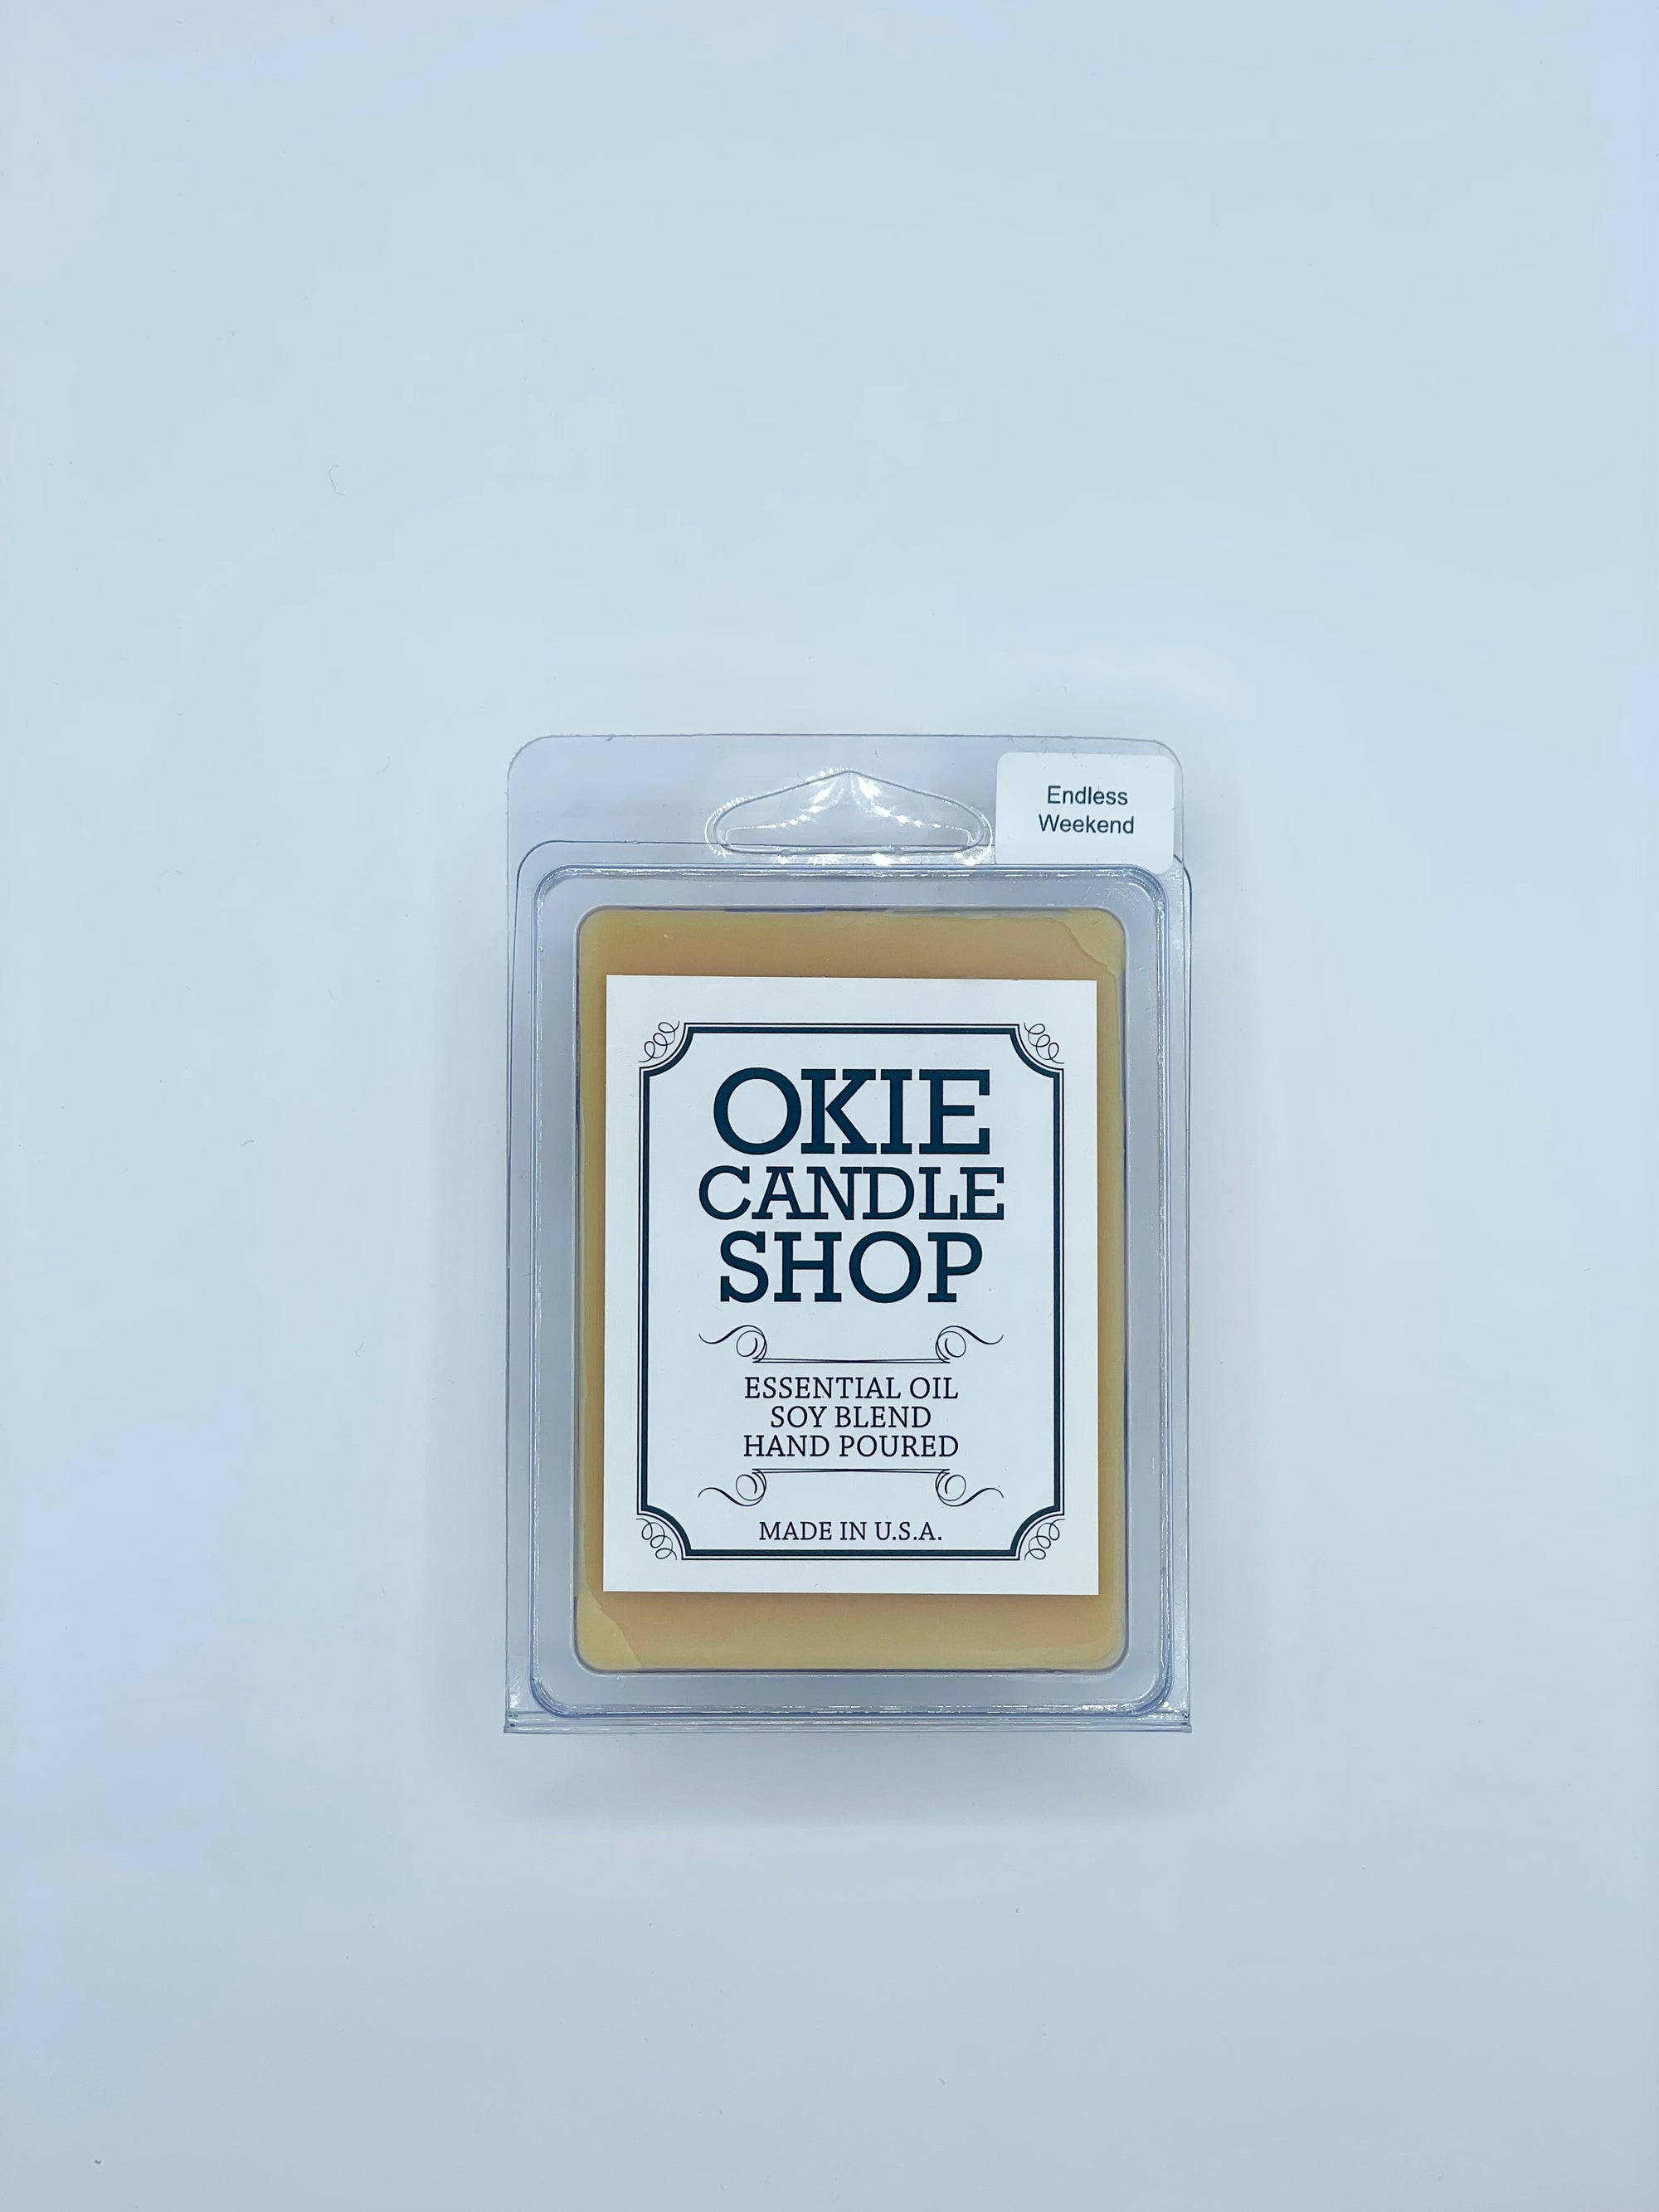 Okie Candle Endless Weekend - Wax Melts